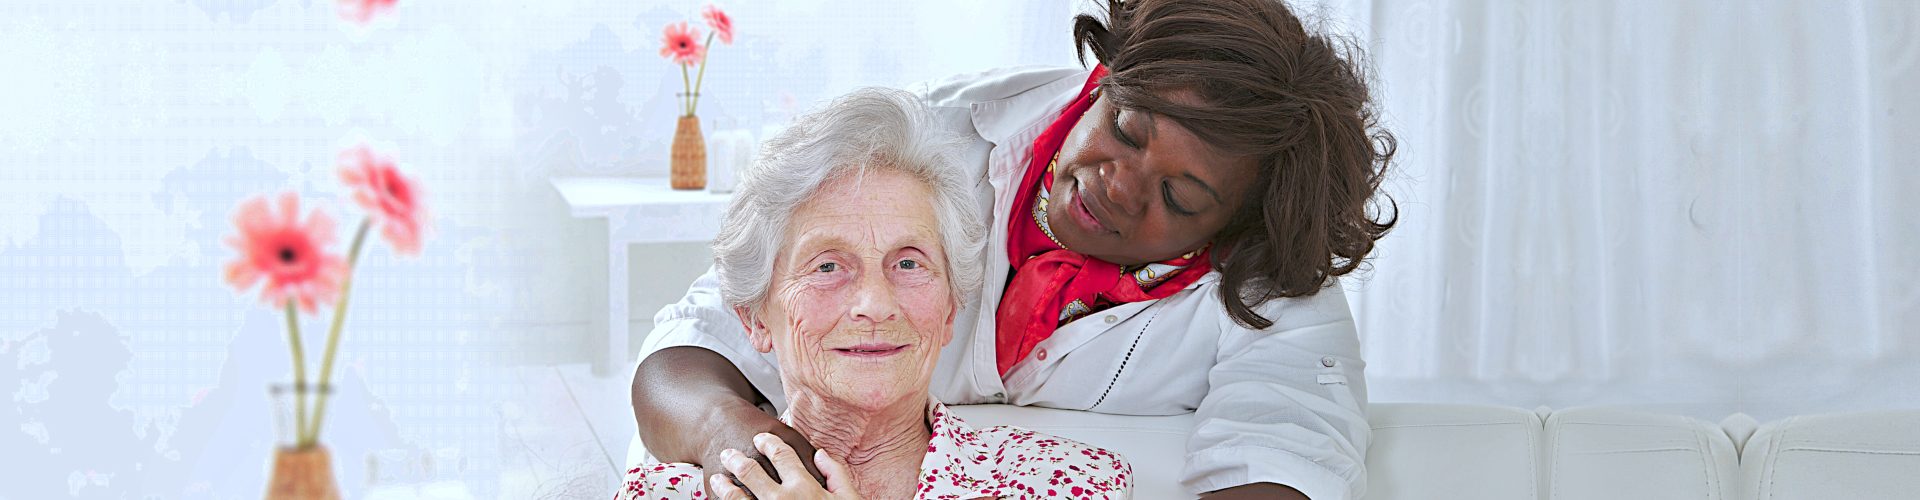 senior woman smiling while the nurse looking at her